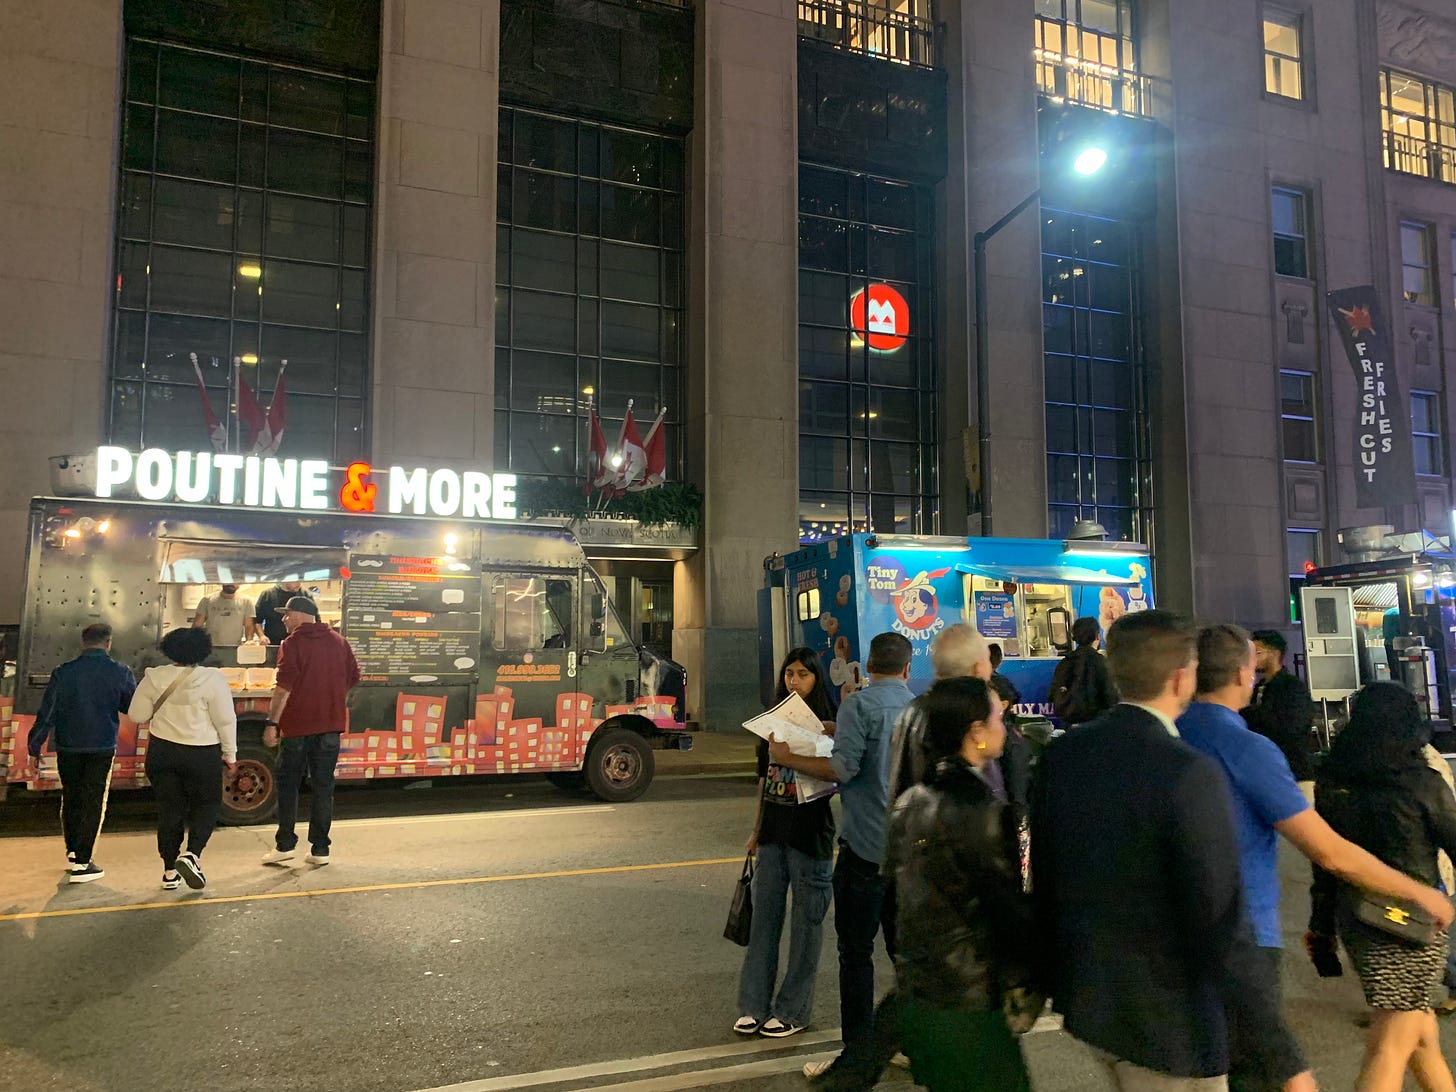 A food truck with a sign that says "Poutine & More" with red, wavy city buildings painted on a black van, and scattered crowds in front.